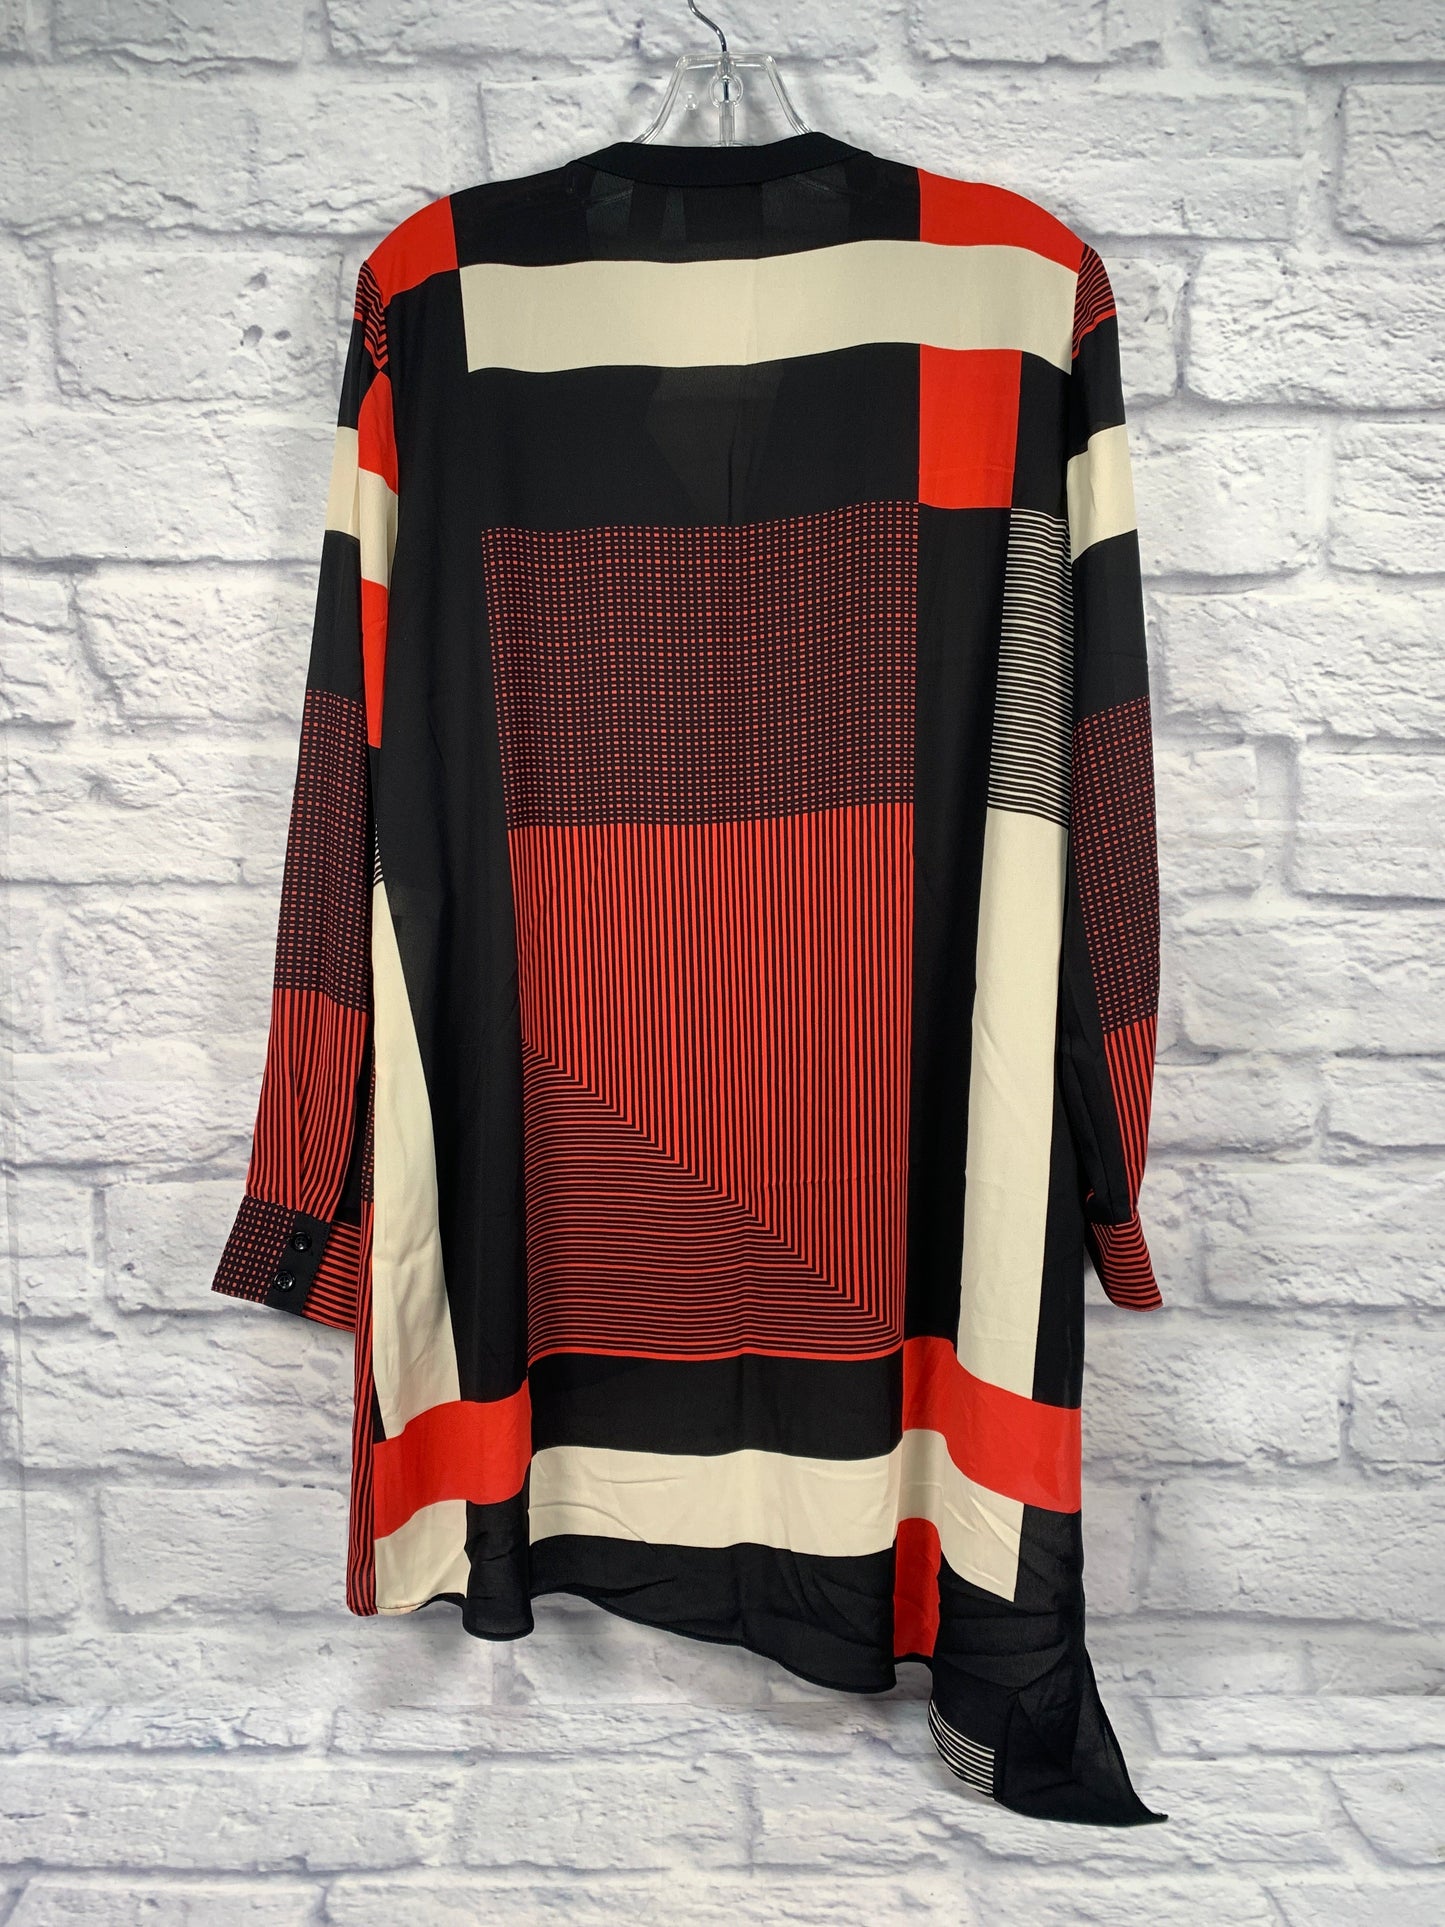 Black & Red Tunic Long Sleeve Chicos, Size M